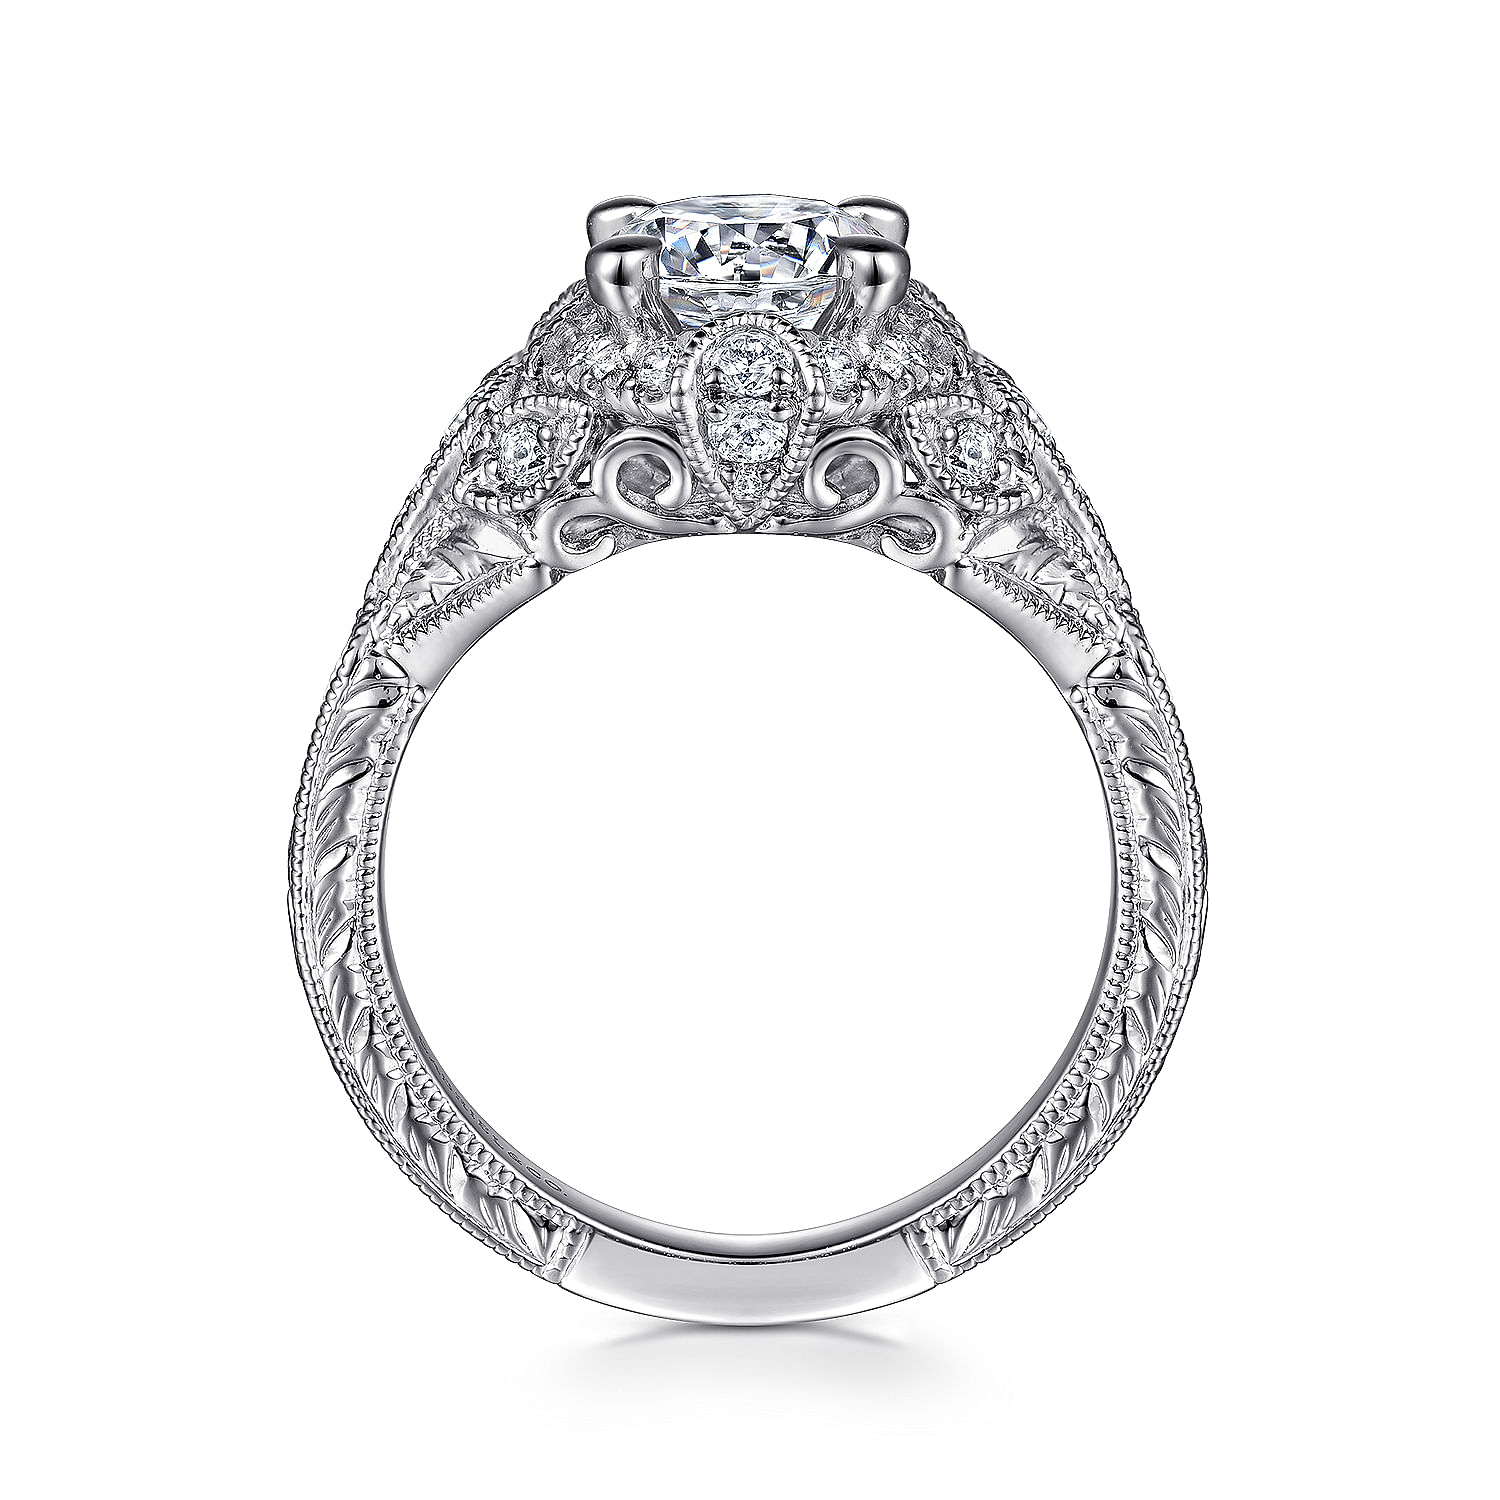 Annadale - Unique 14K White Gold Vintage Inspired Diamond Halo Engagement Ring